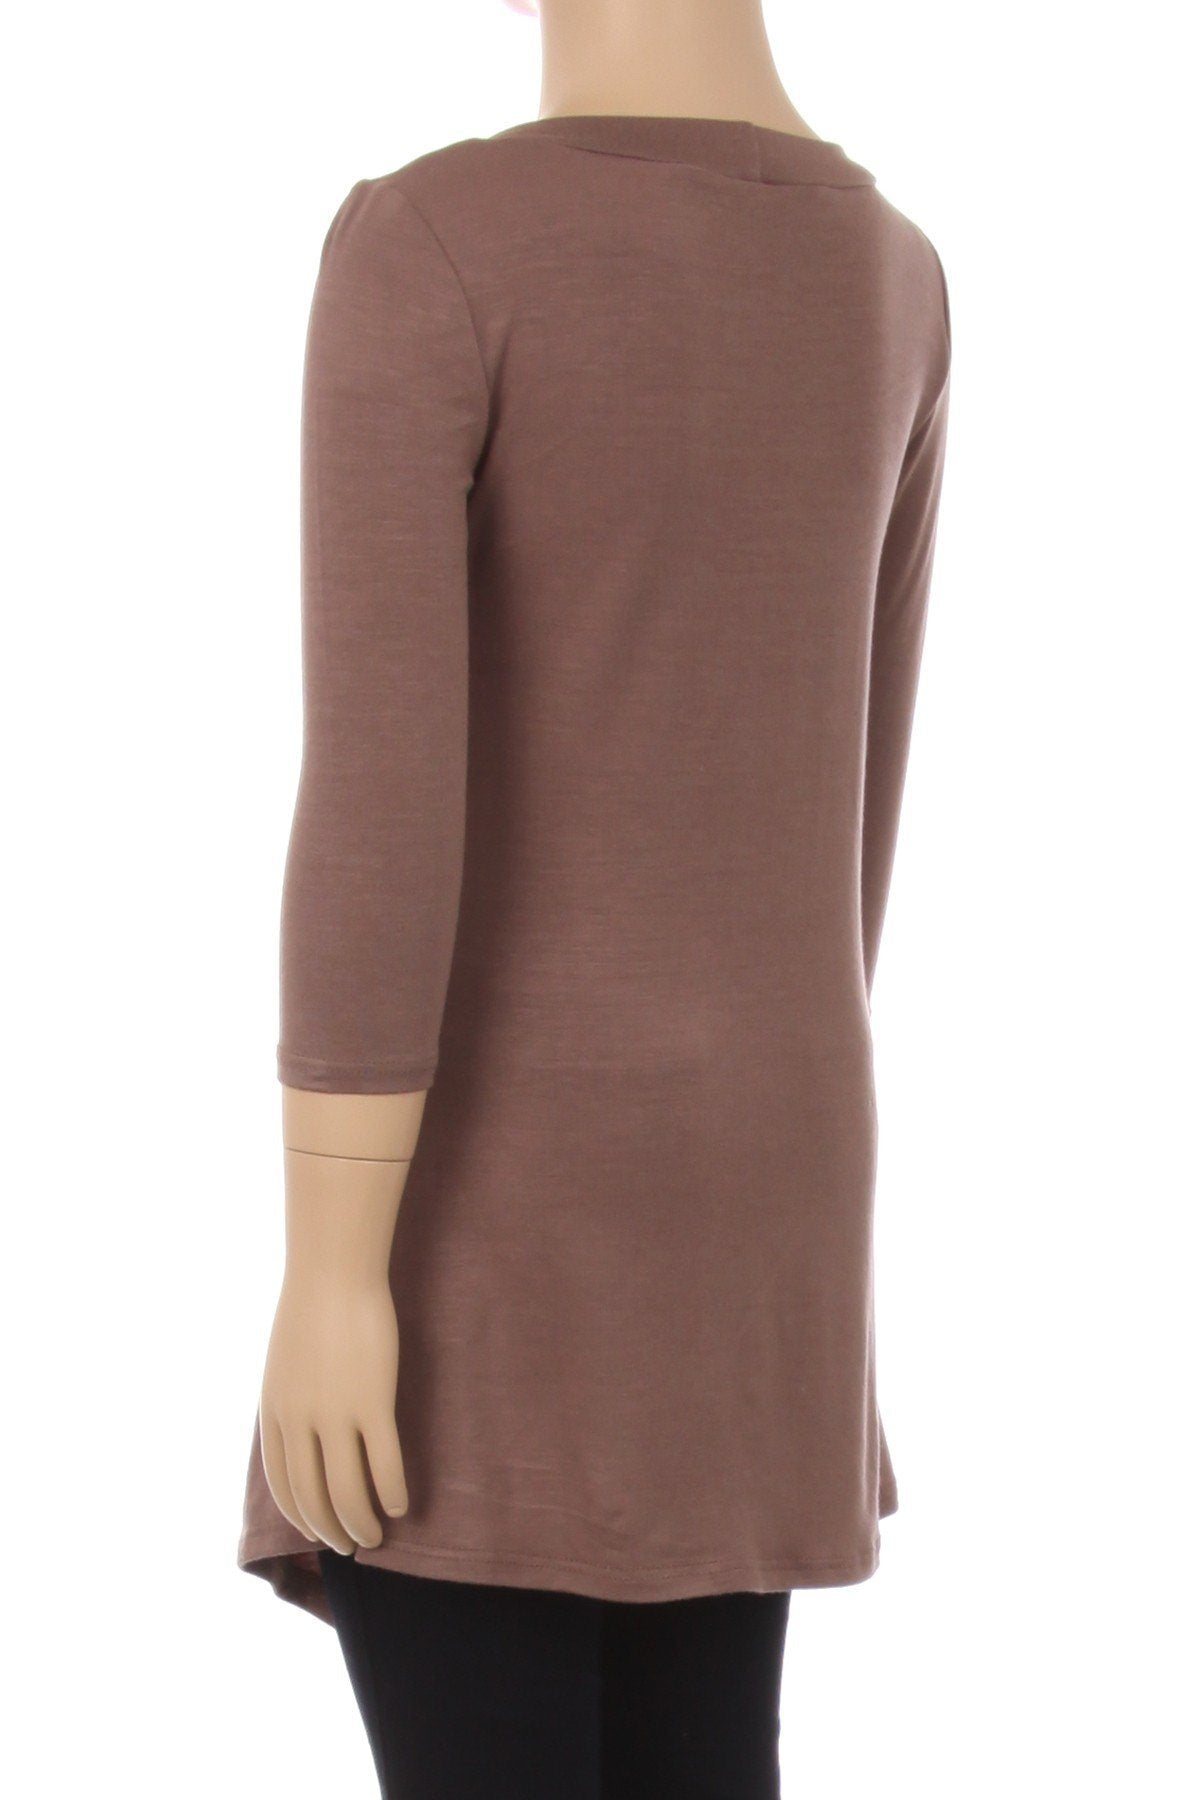 Girls Solid Brown Dress Asymmetric 3/4 Sleeve Tunic Top Tops MomMe and More 